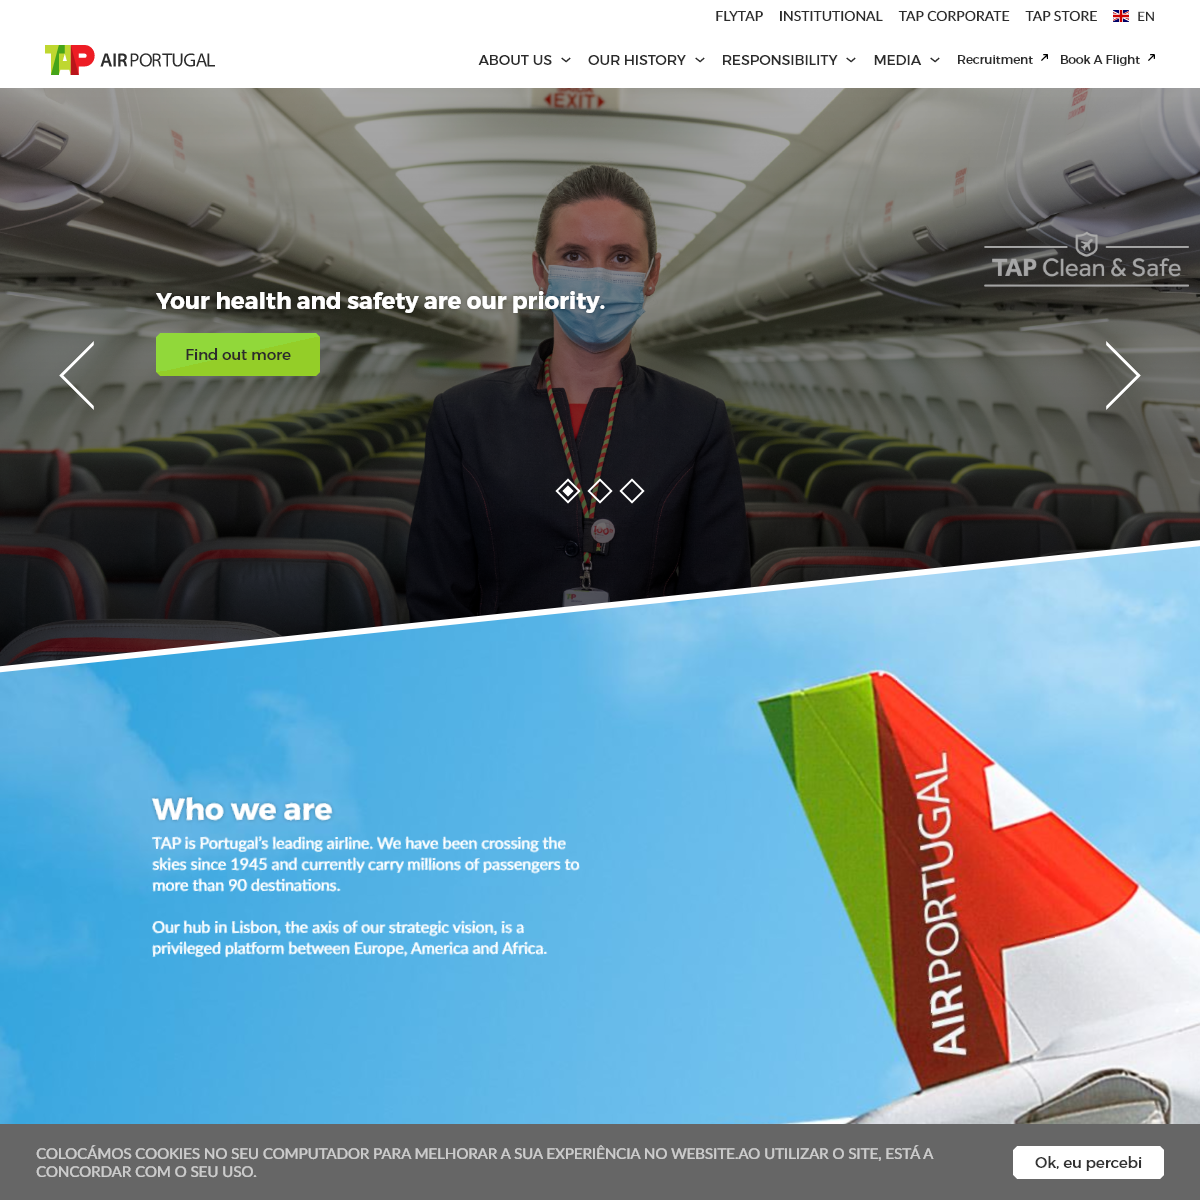 A complete backup of tapairportugal.com